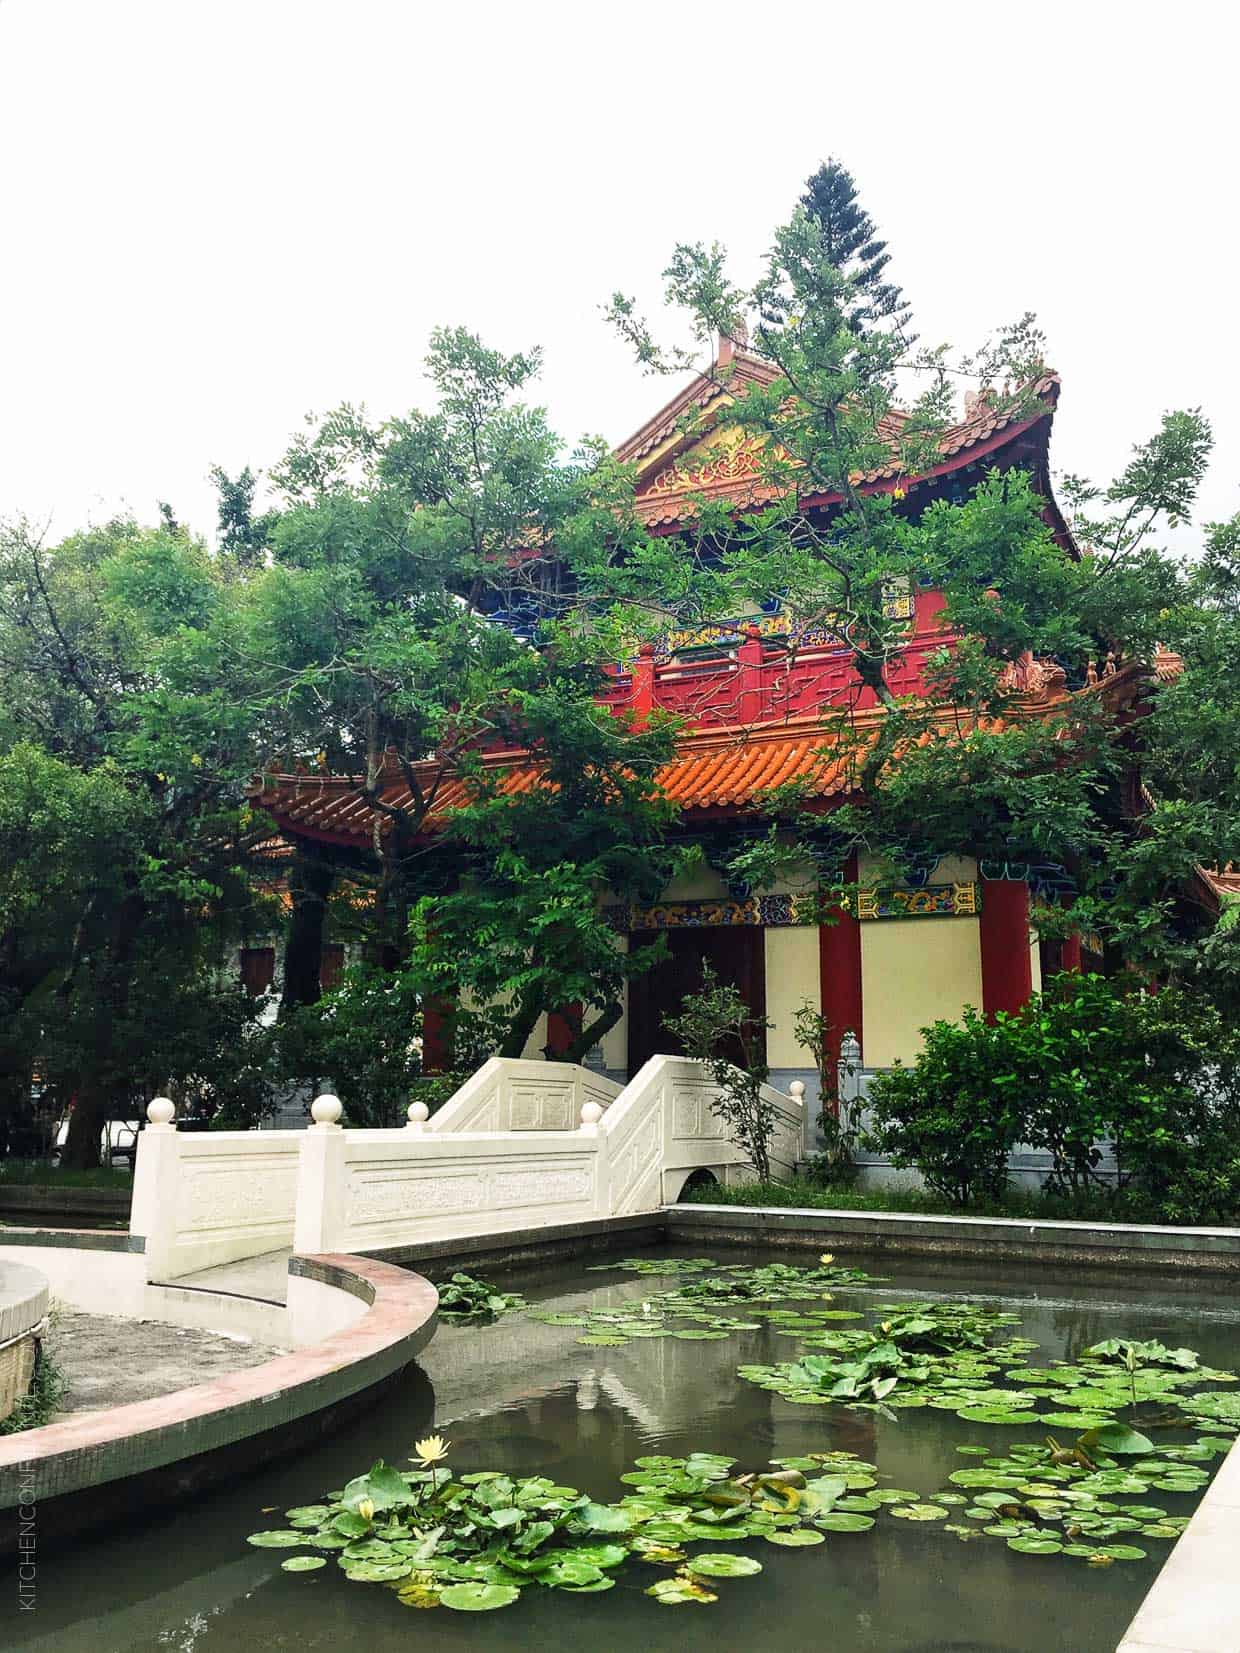 An image of a traditional hong kong building, with a moat filled with lilly pads.